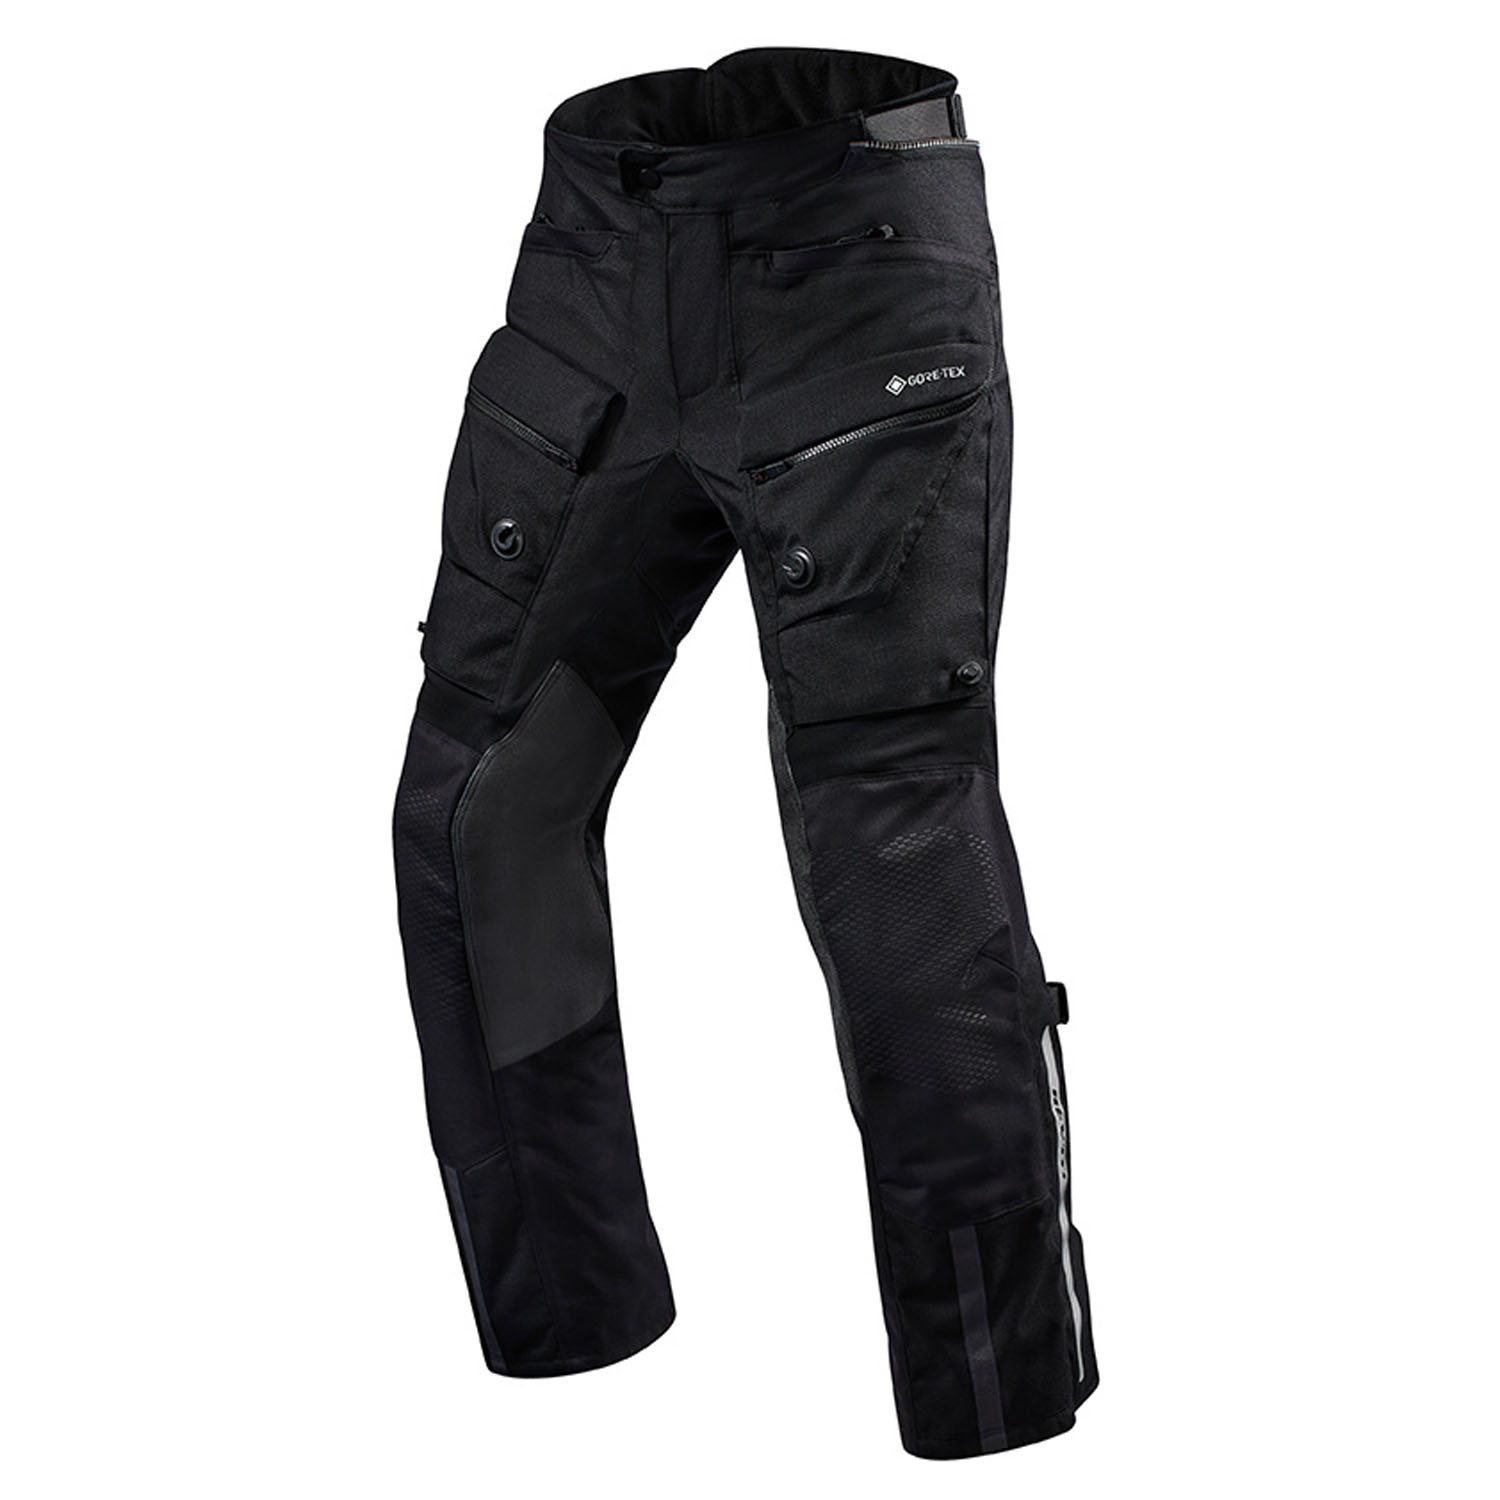 Image of EU REV'IT! Trousers Defender 3 GTX Black Long Motorcycle Pants Taille XL